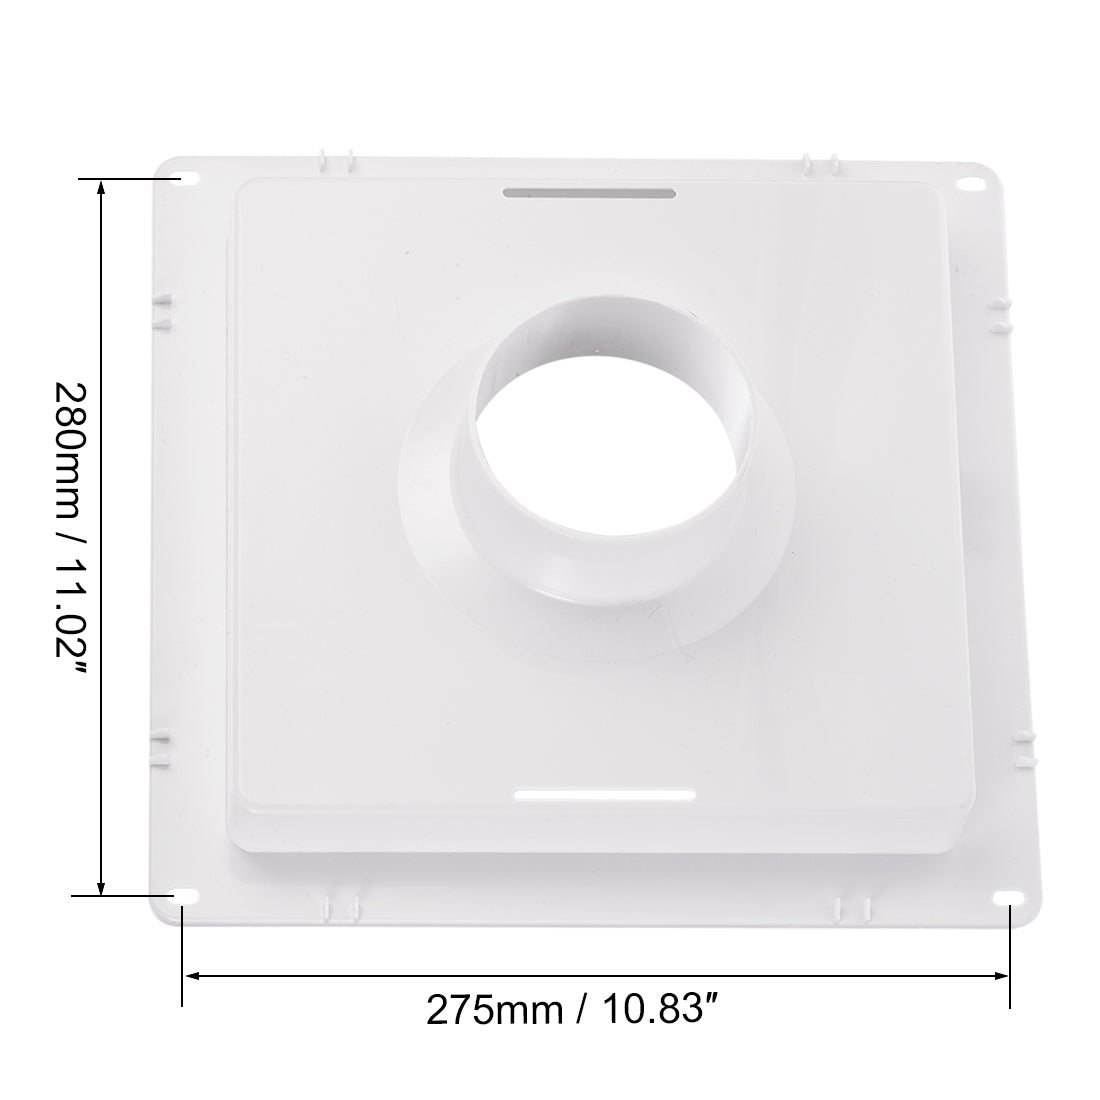 uxcell Uxcell Square Air Vent Duct Connector Flange, Fitting 3.74Inch ID Ducting, Ducts Mounting Plate, for Heating Cooling Ventilation System, ABS Plastic, White